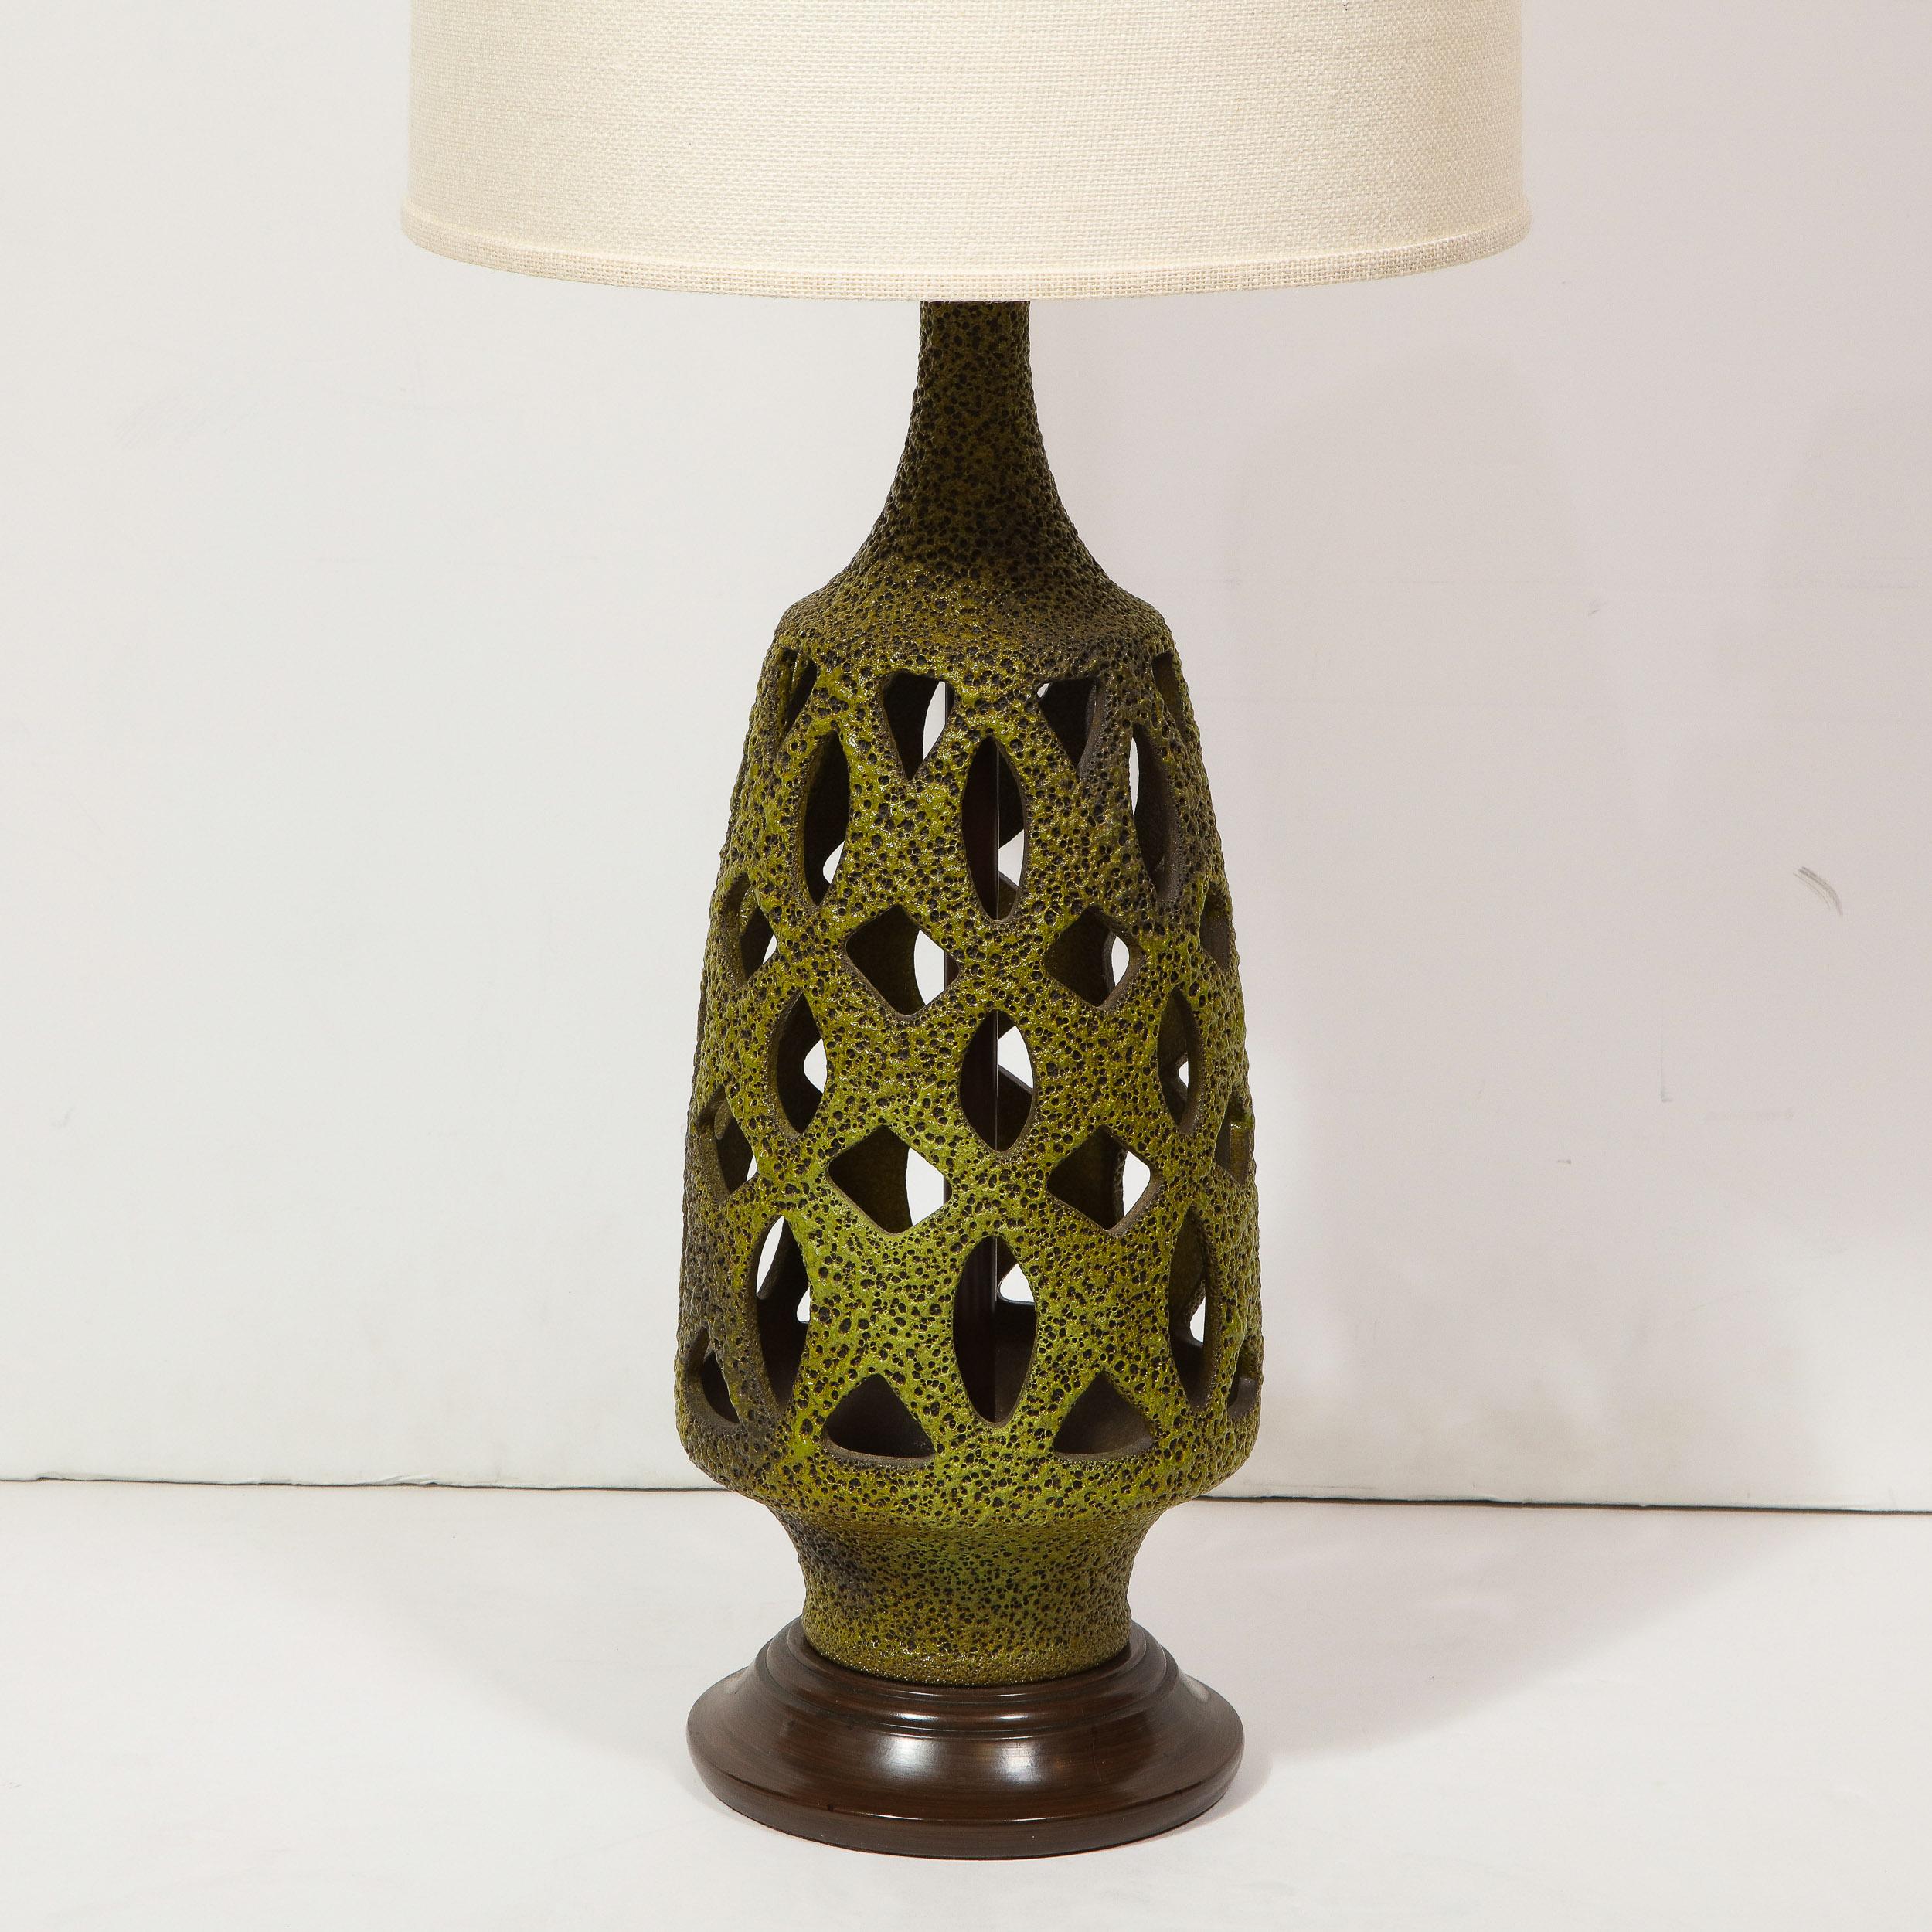 This stunning and sophisticated Mid-Century Modern table lamp was realized in the United States circa 1960. Sitting on a subtly convex painted metal base, the lamp flares out into a gently tapering conical body and elegant hourglass form neck. Its